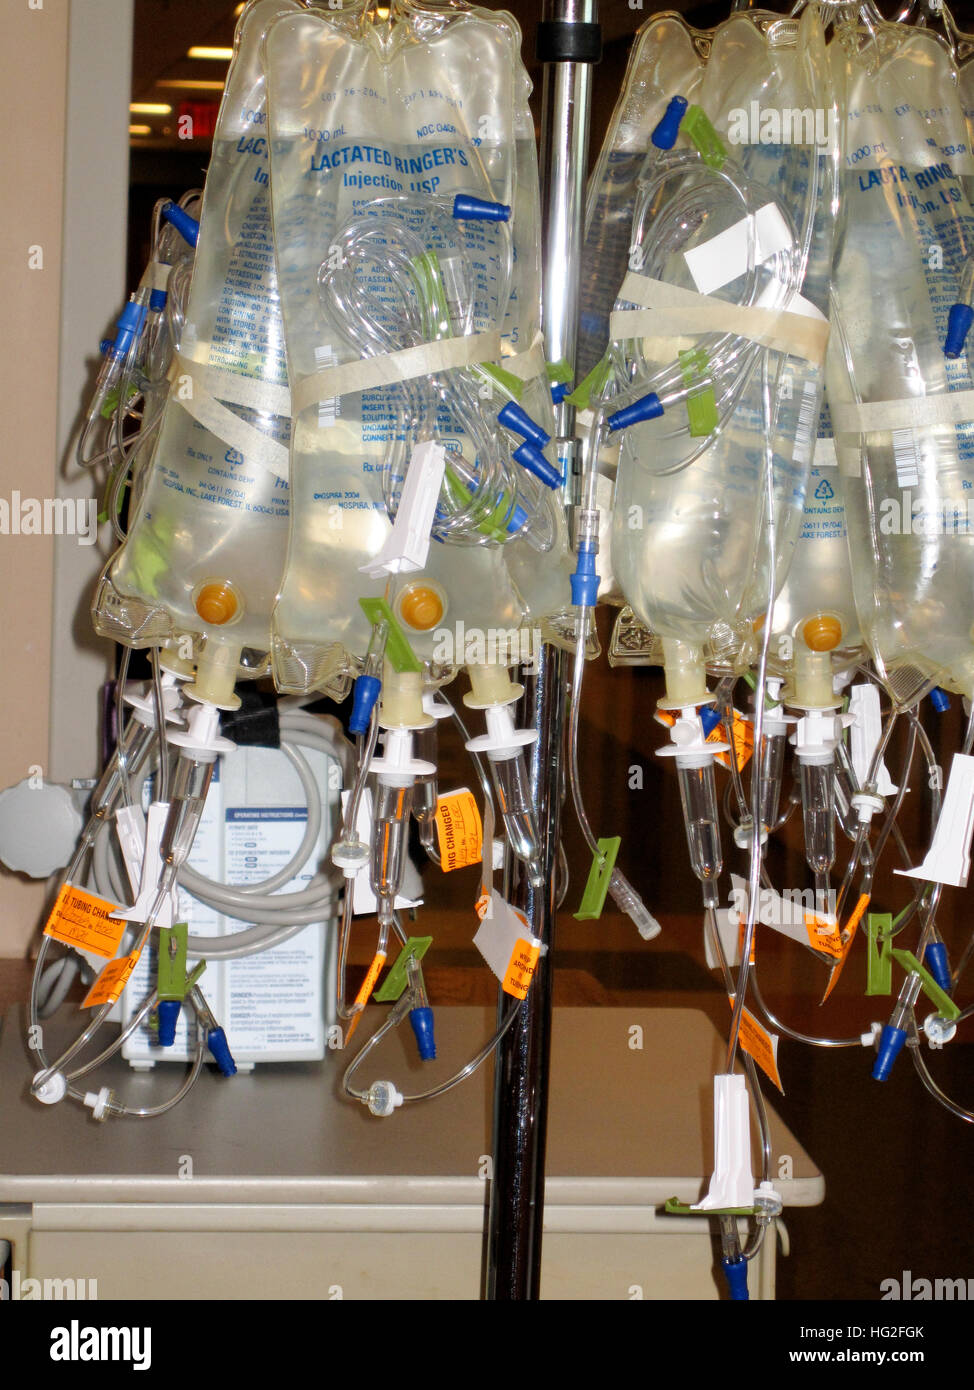 Intervenes bags of Lactated Ringer's solution hanging from a dispenser hook in a hospital. St Paul Minnesota MN USA Stock Photo